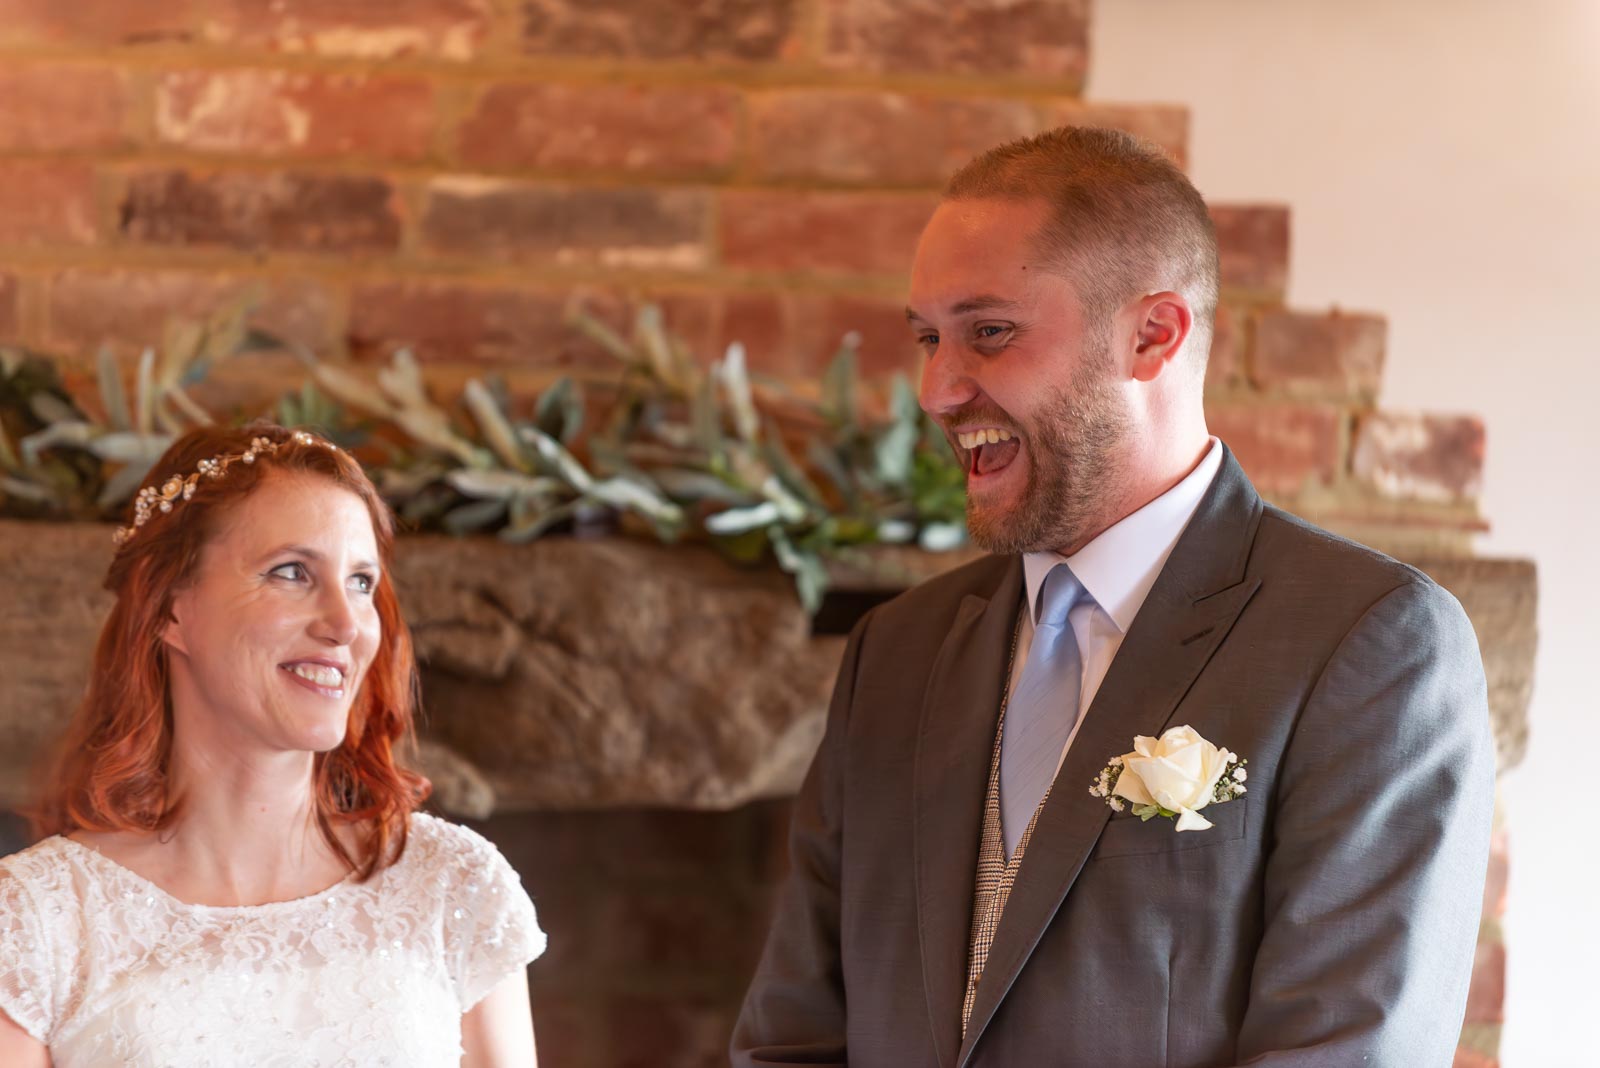 Adrienn and Lee enjoy a laugh at the top of the aisle at Milwards Farm Estate near Lewes.